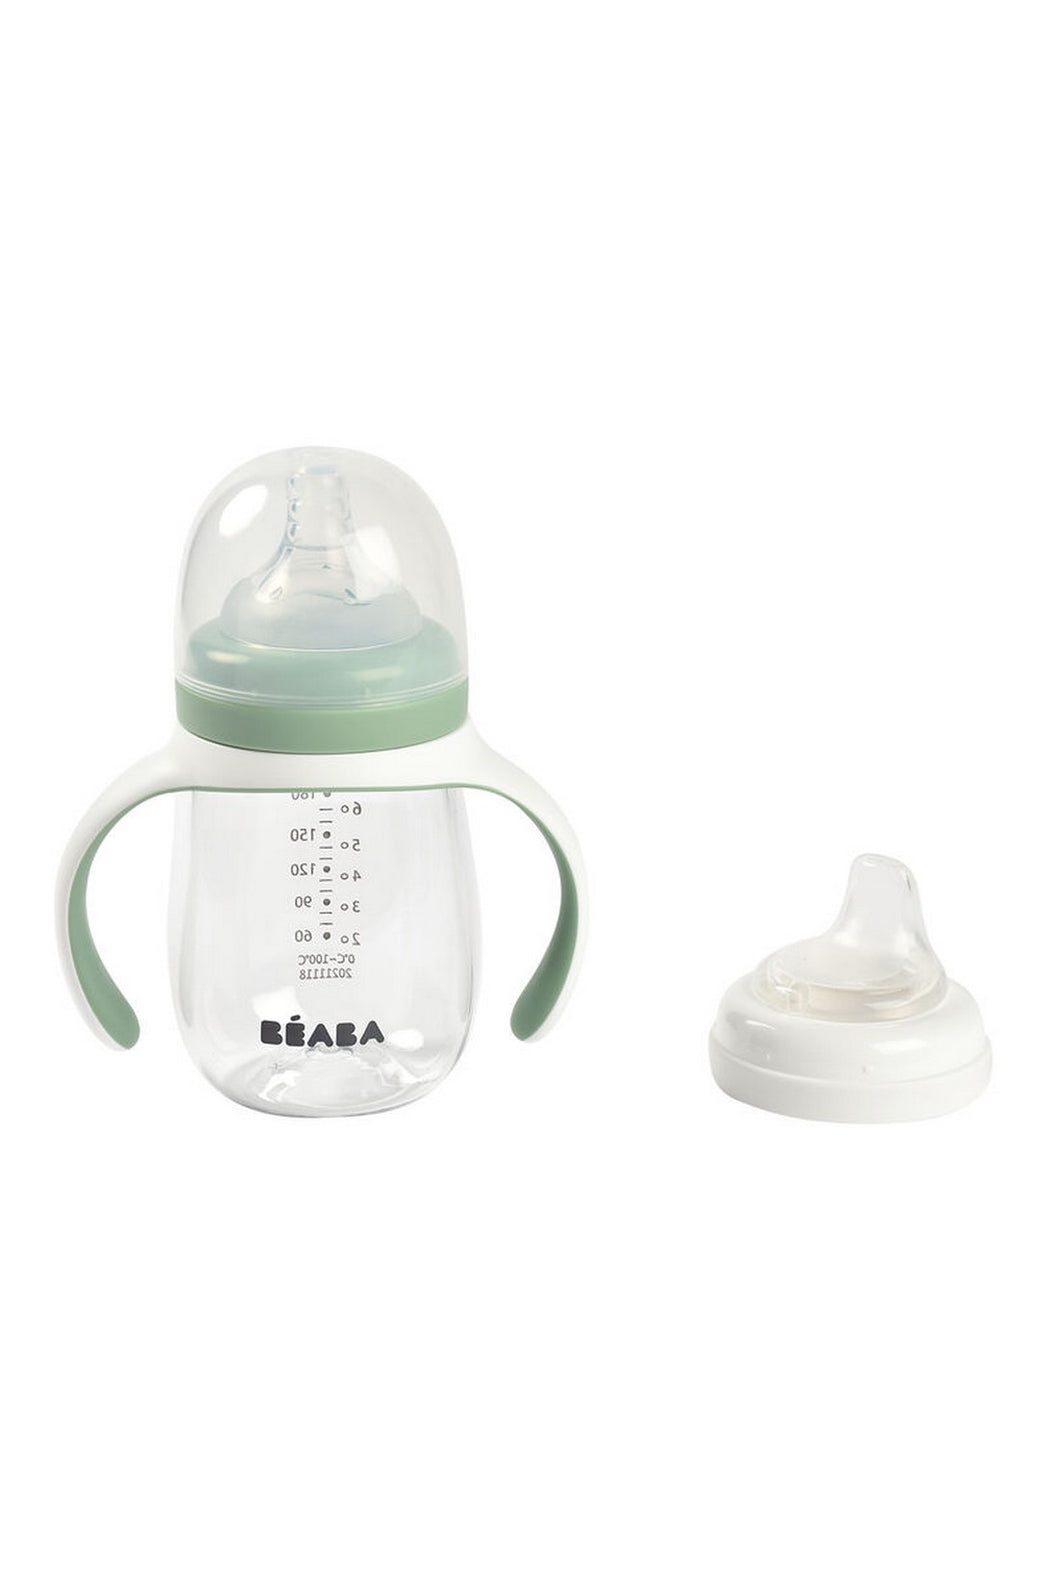 Beaba 2-In-1 Learning Glass Milk Bottle With Silicone Cover Sage Green 2